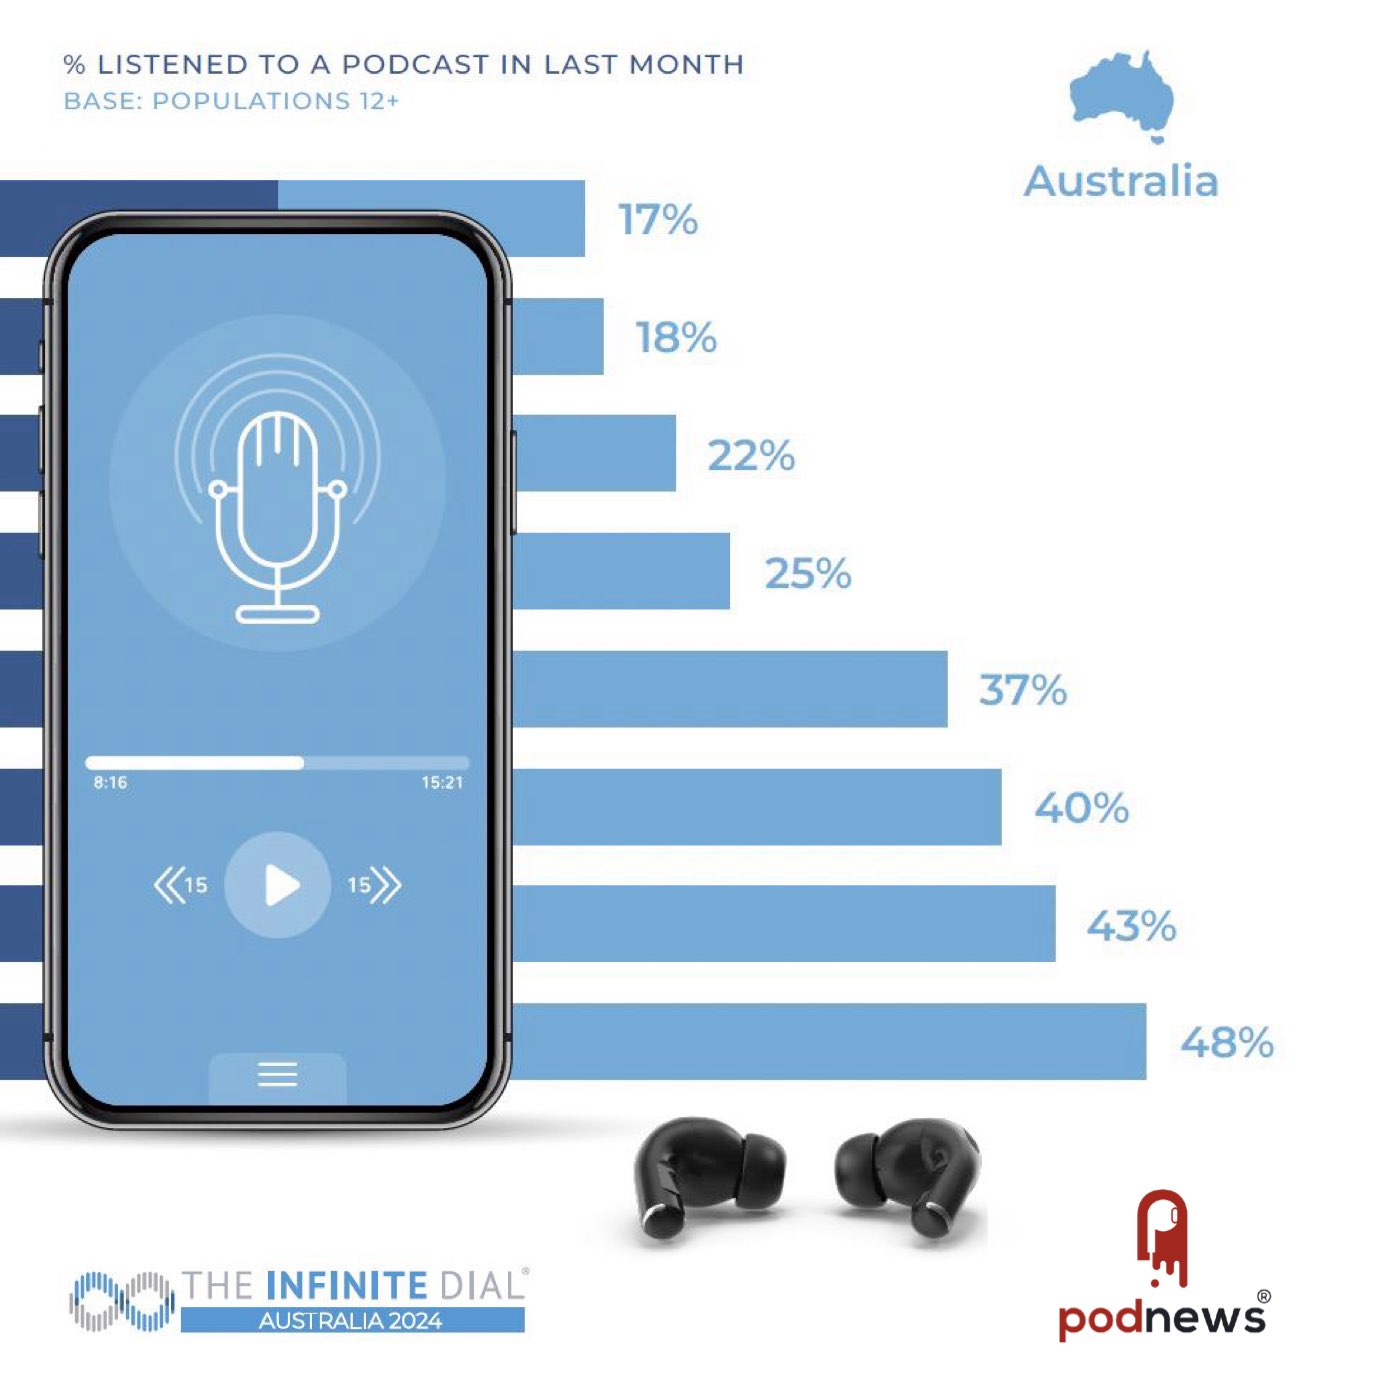 Podcast listening in Australia bigger than the US